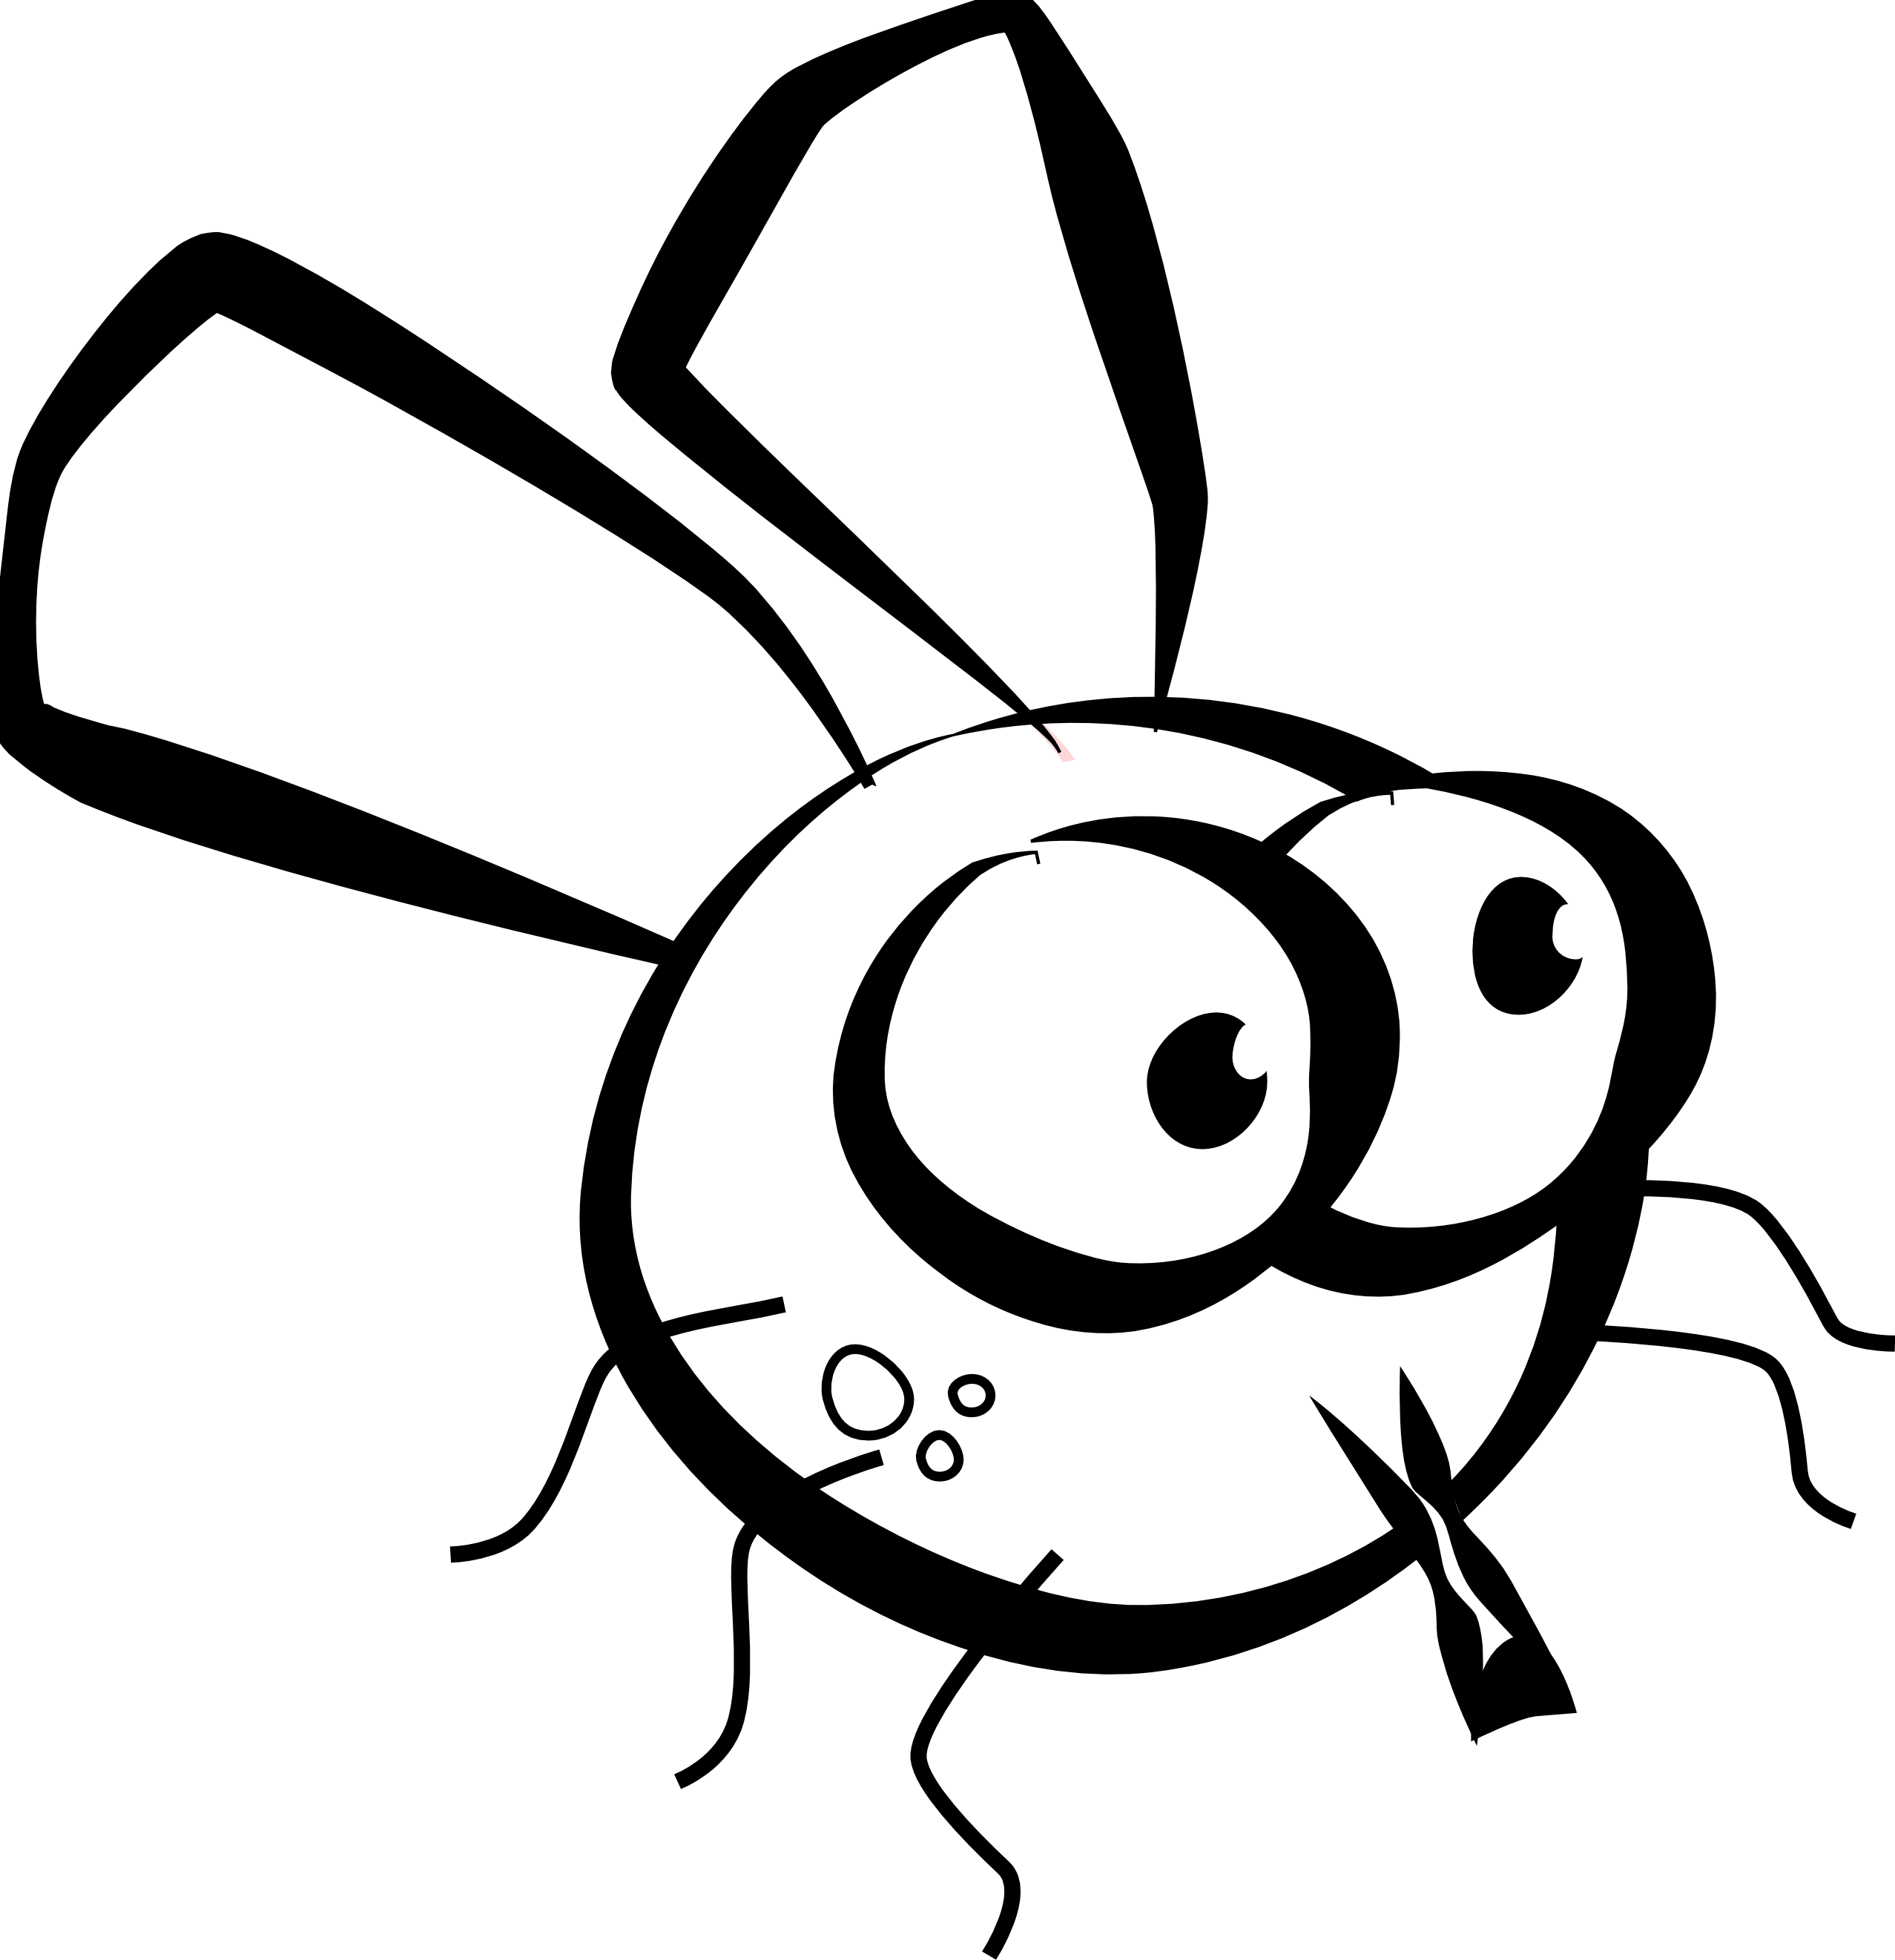 fly clipart black and white - photo #22